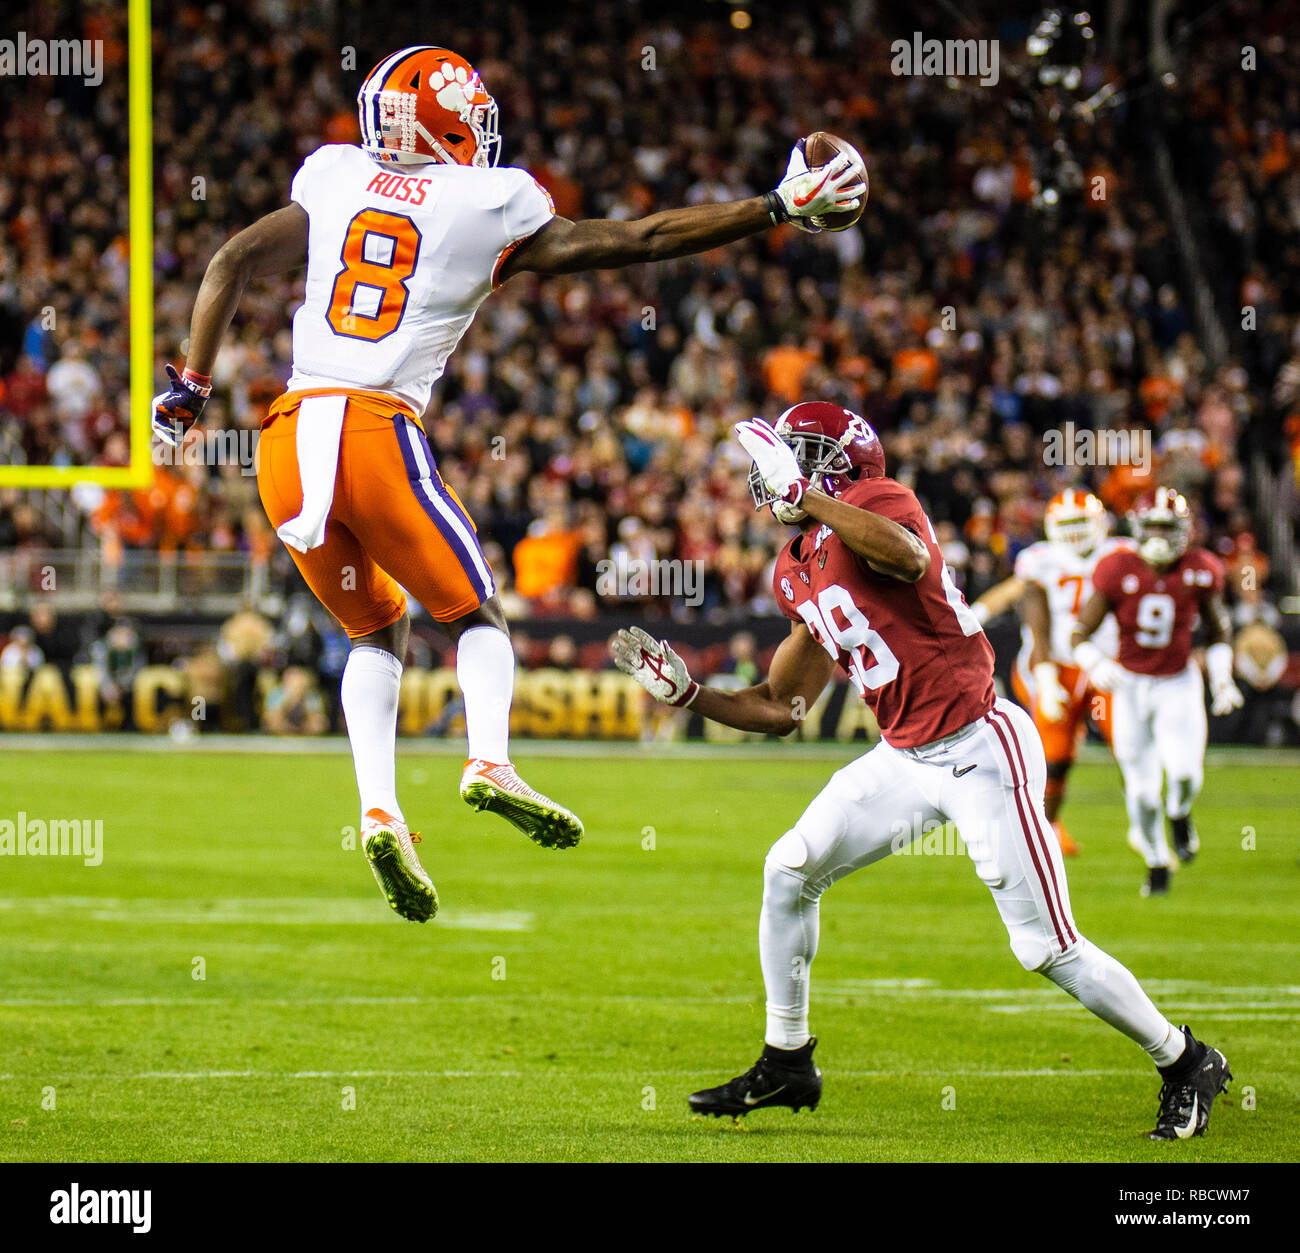 Justyn Ross catch video: Clemson wideout makes ridiculous grab